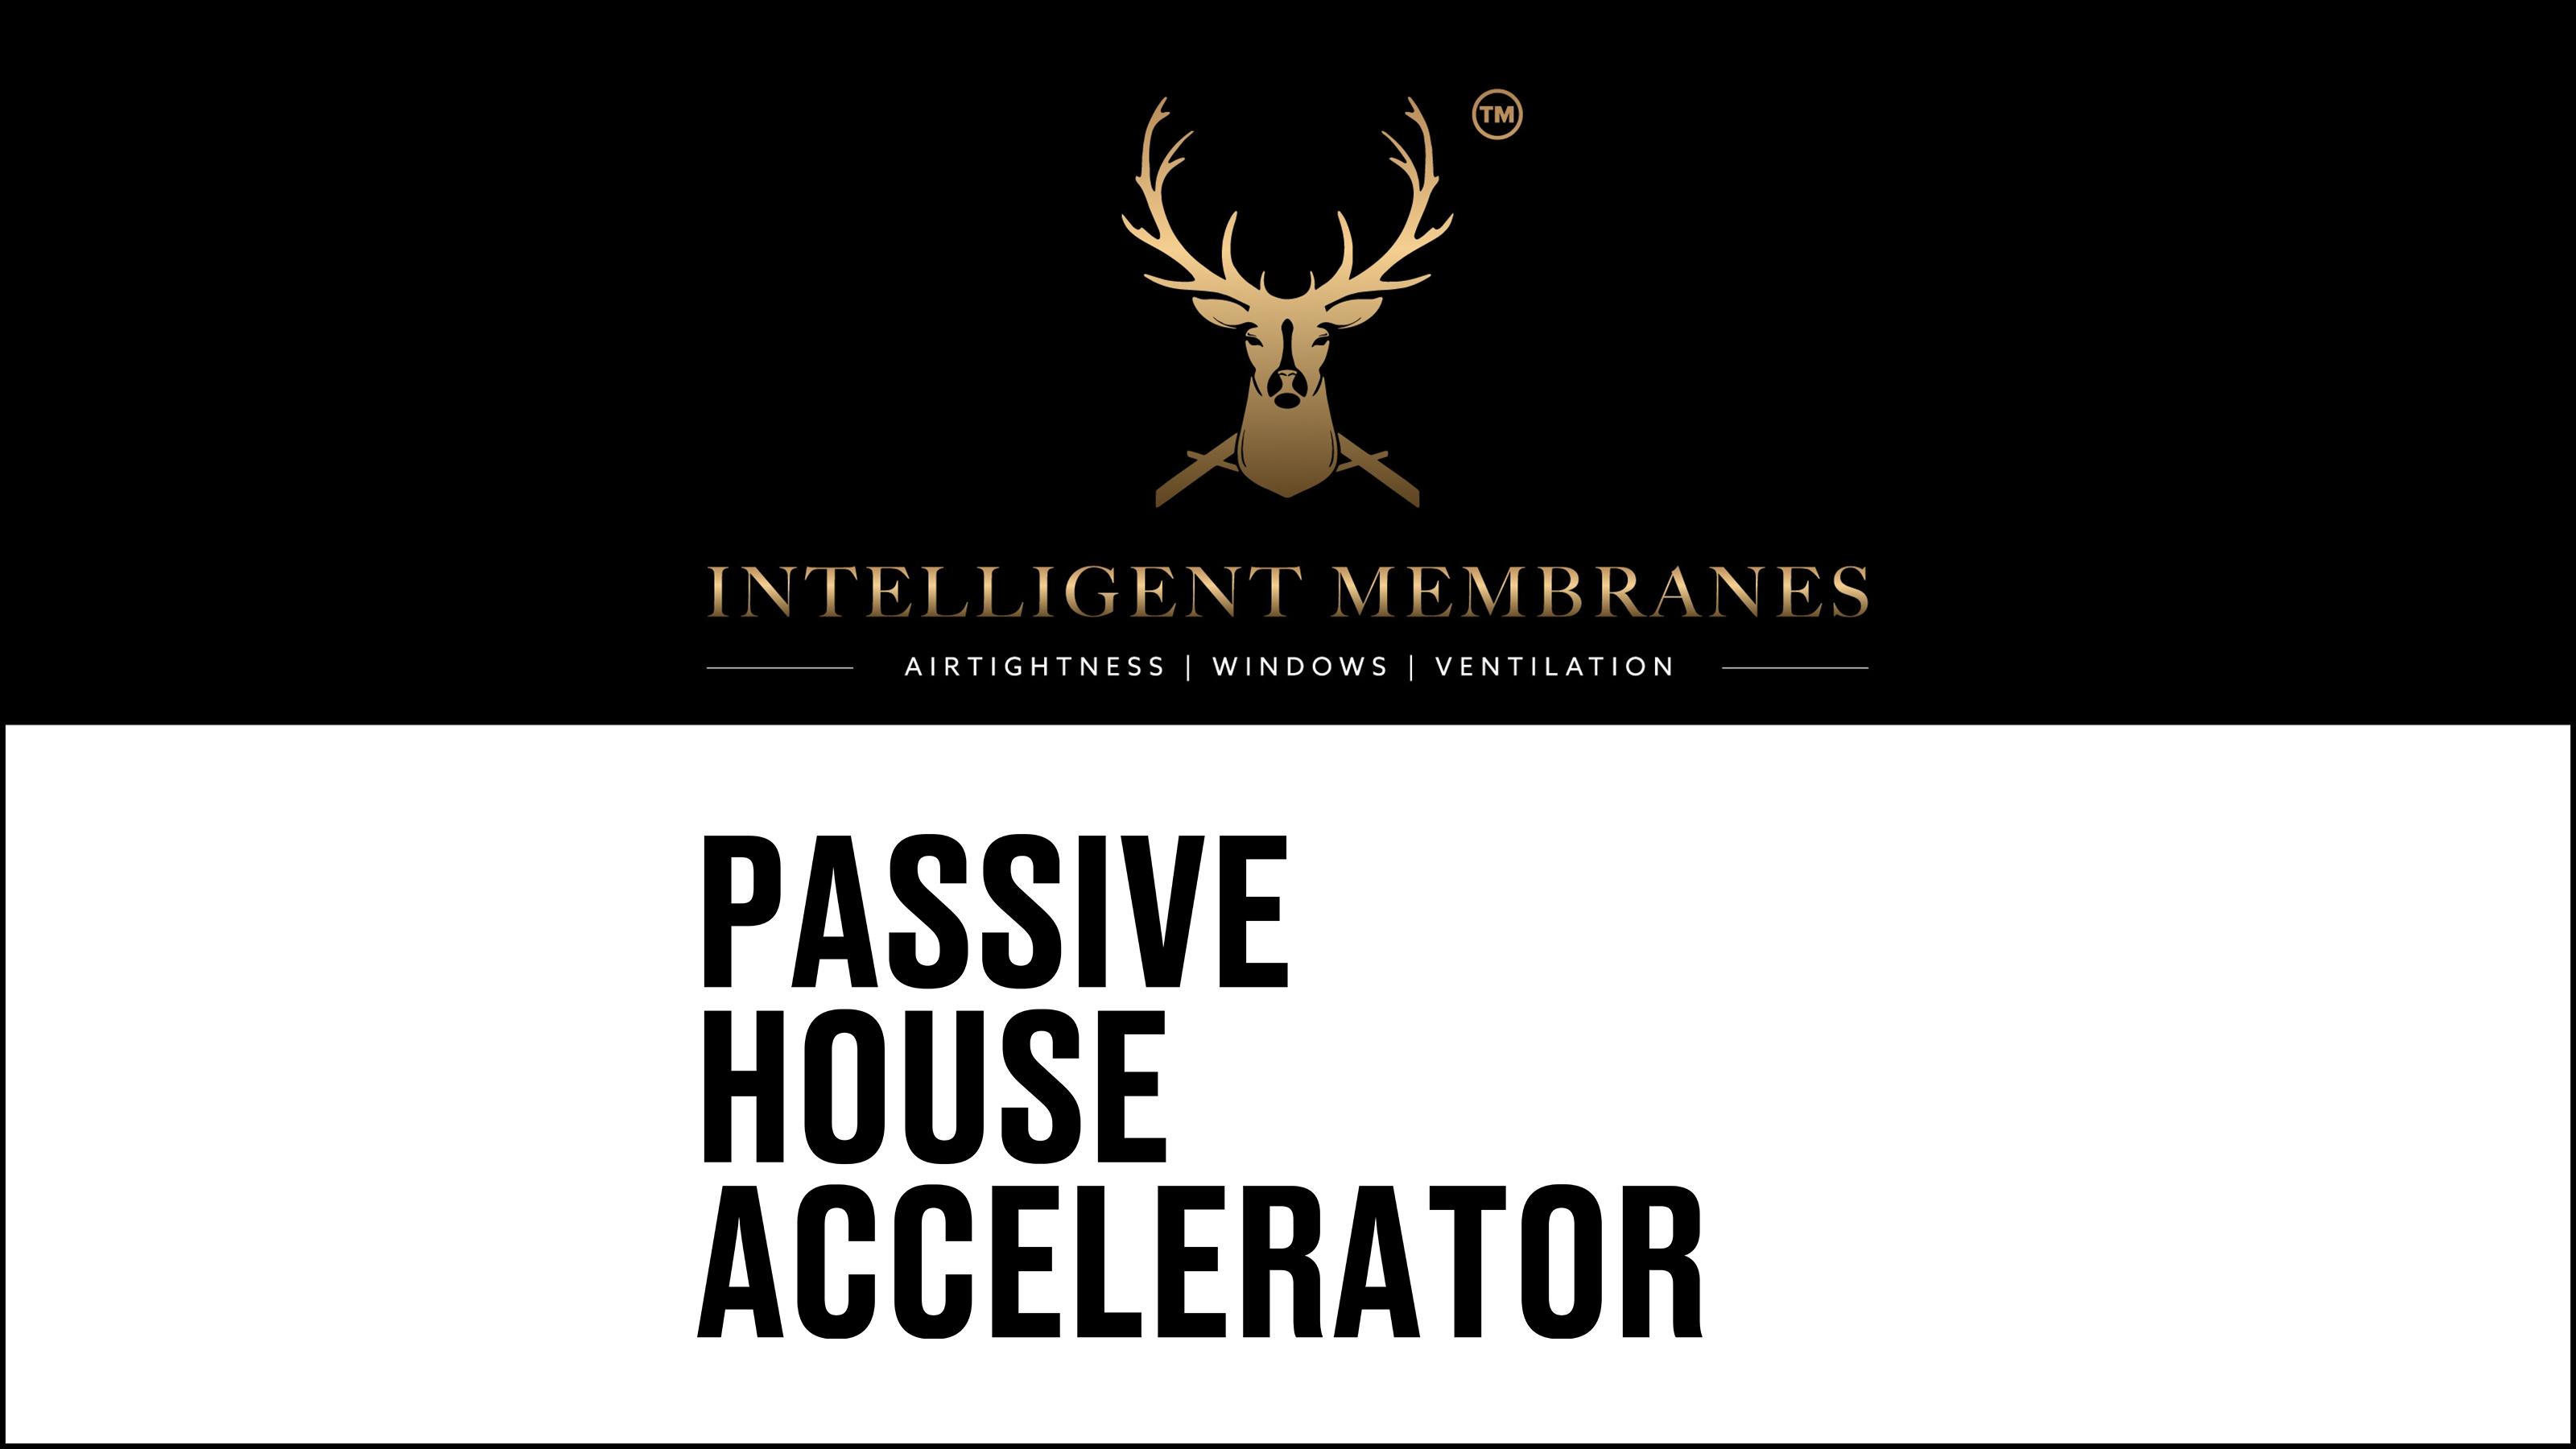 Intelligent Membranes Supports Passive House Accelerator as a Champion Sponsor